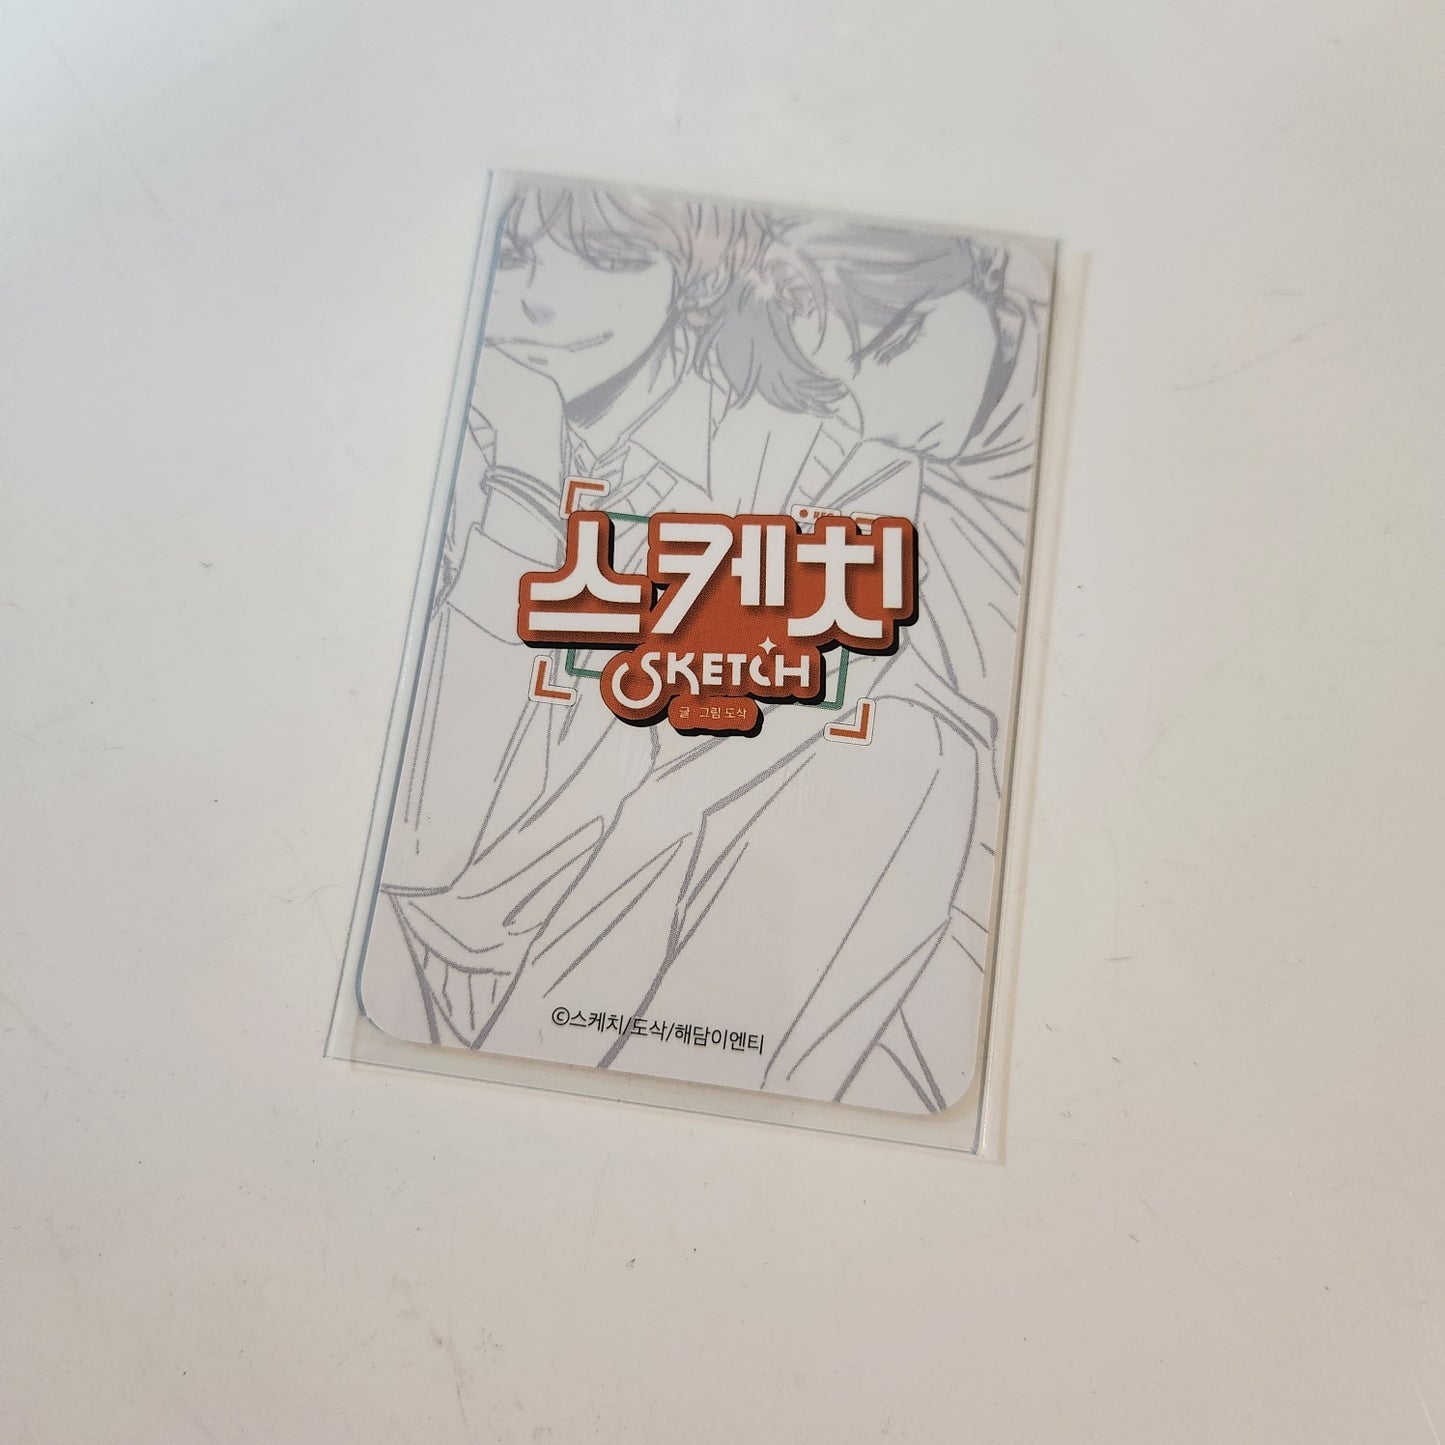 [collaboration cafe] Sketch : 1 photo card